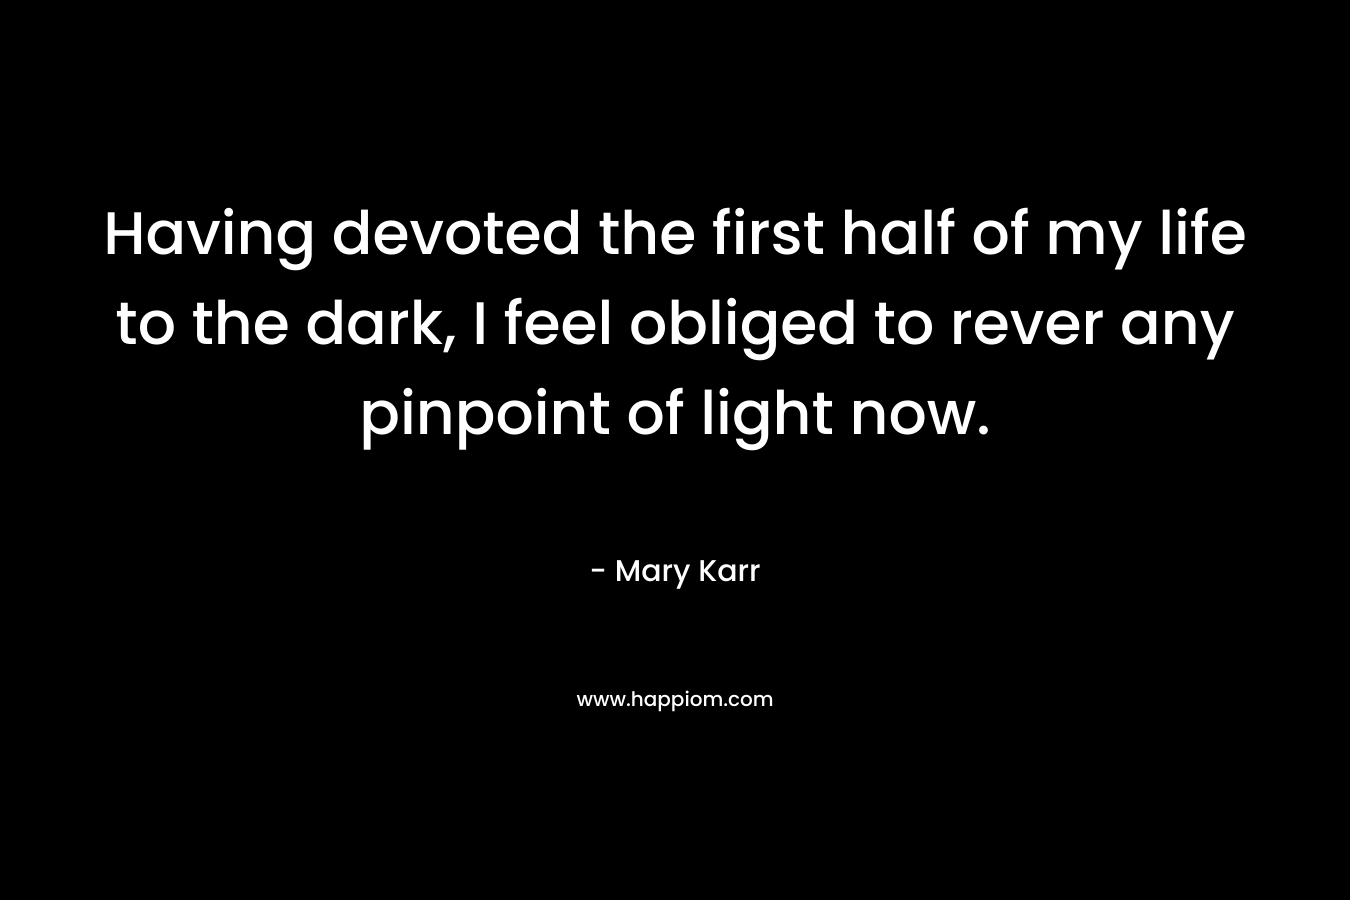 Having devoted the first half of my life to the dark, I feel obliged to rever any pinpoint of light now.